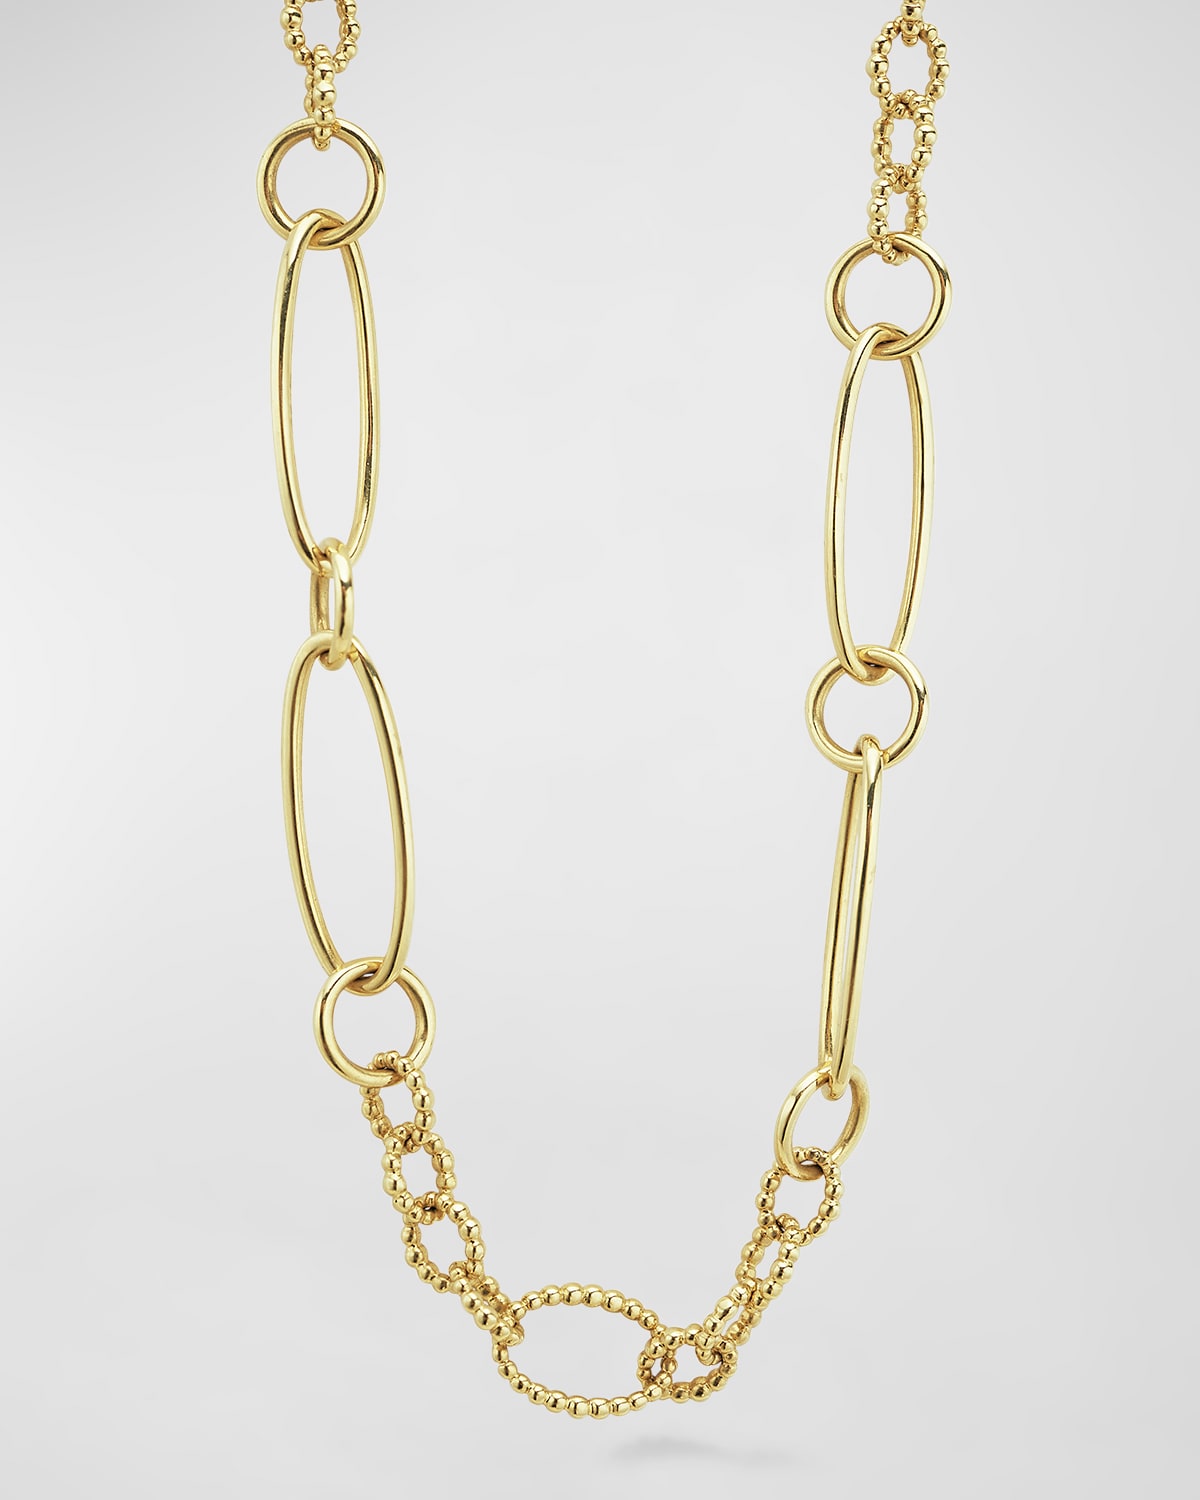 Lagos 18k Yellow Gold Signature Caviar Oval Link Chain Necklace, 20